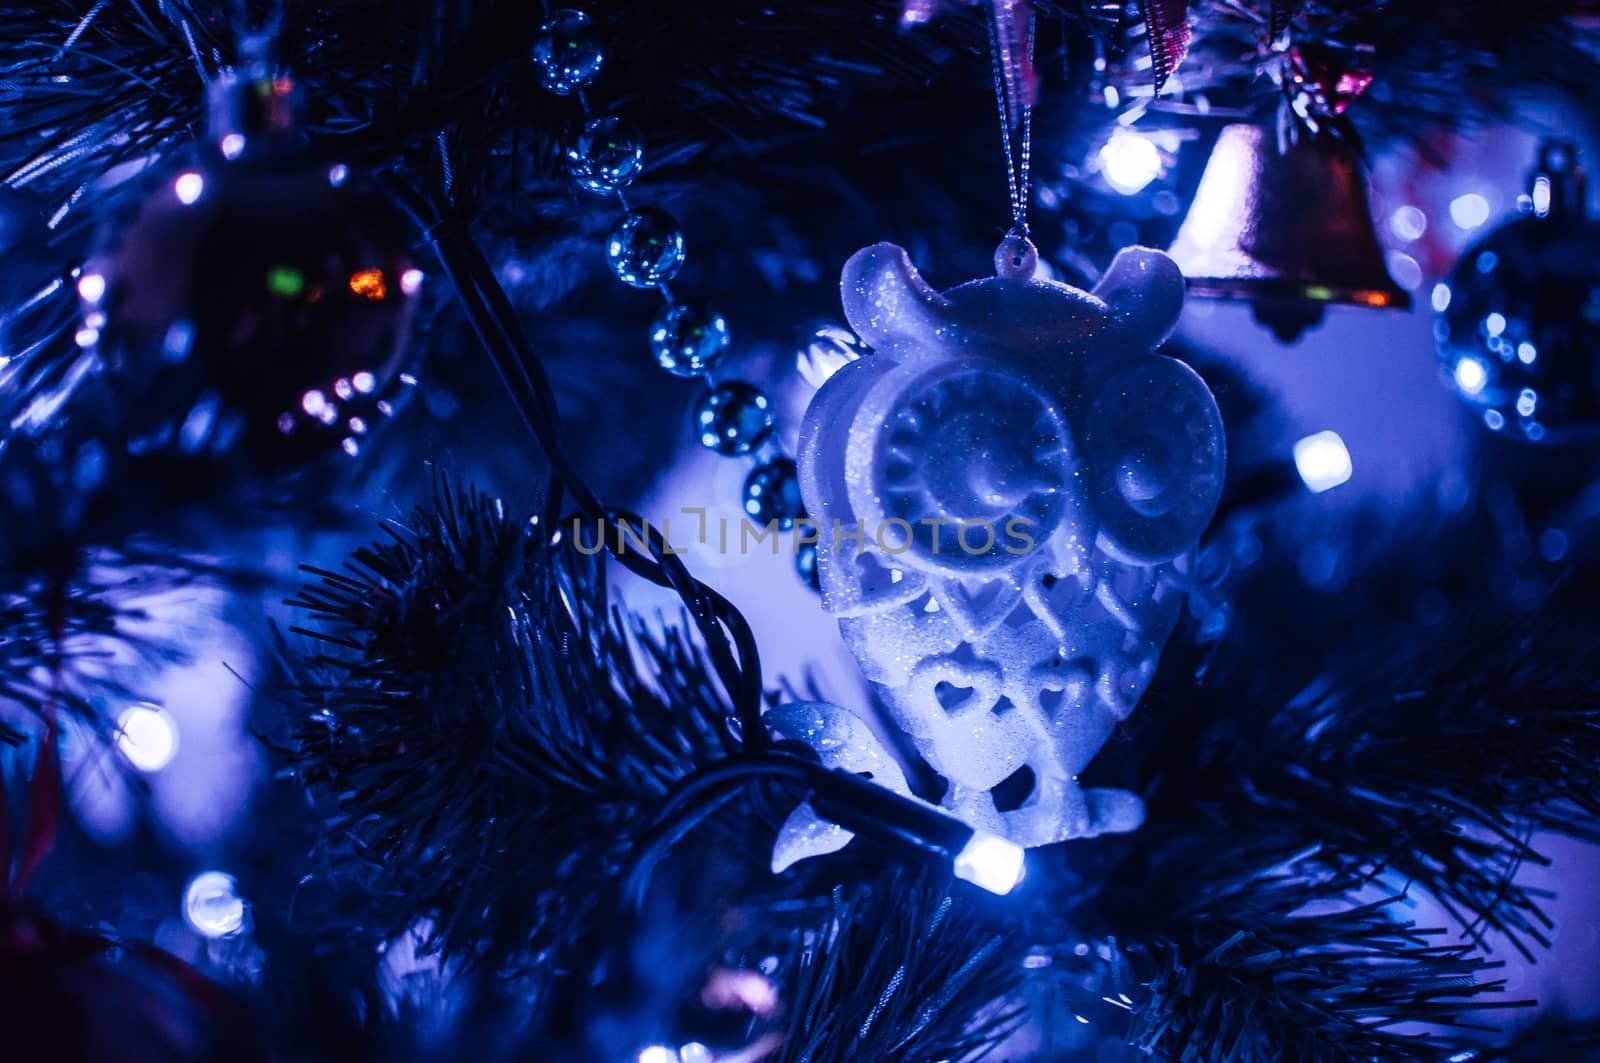 Decorated Christmas tree close-up in neon blue light. Toy glass owl and garland with lights with lanterns. New Year's baubles macro photo with bokeh. Winter holiday light decoration